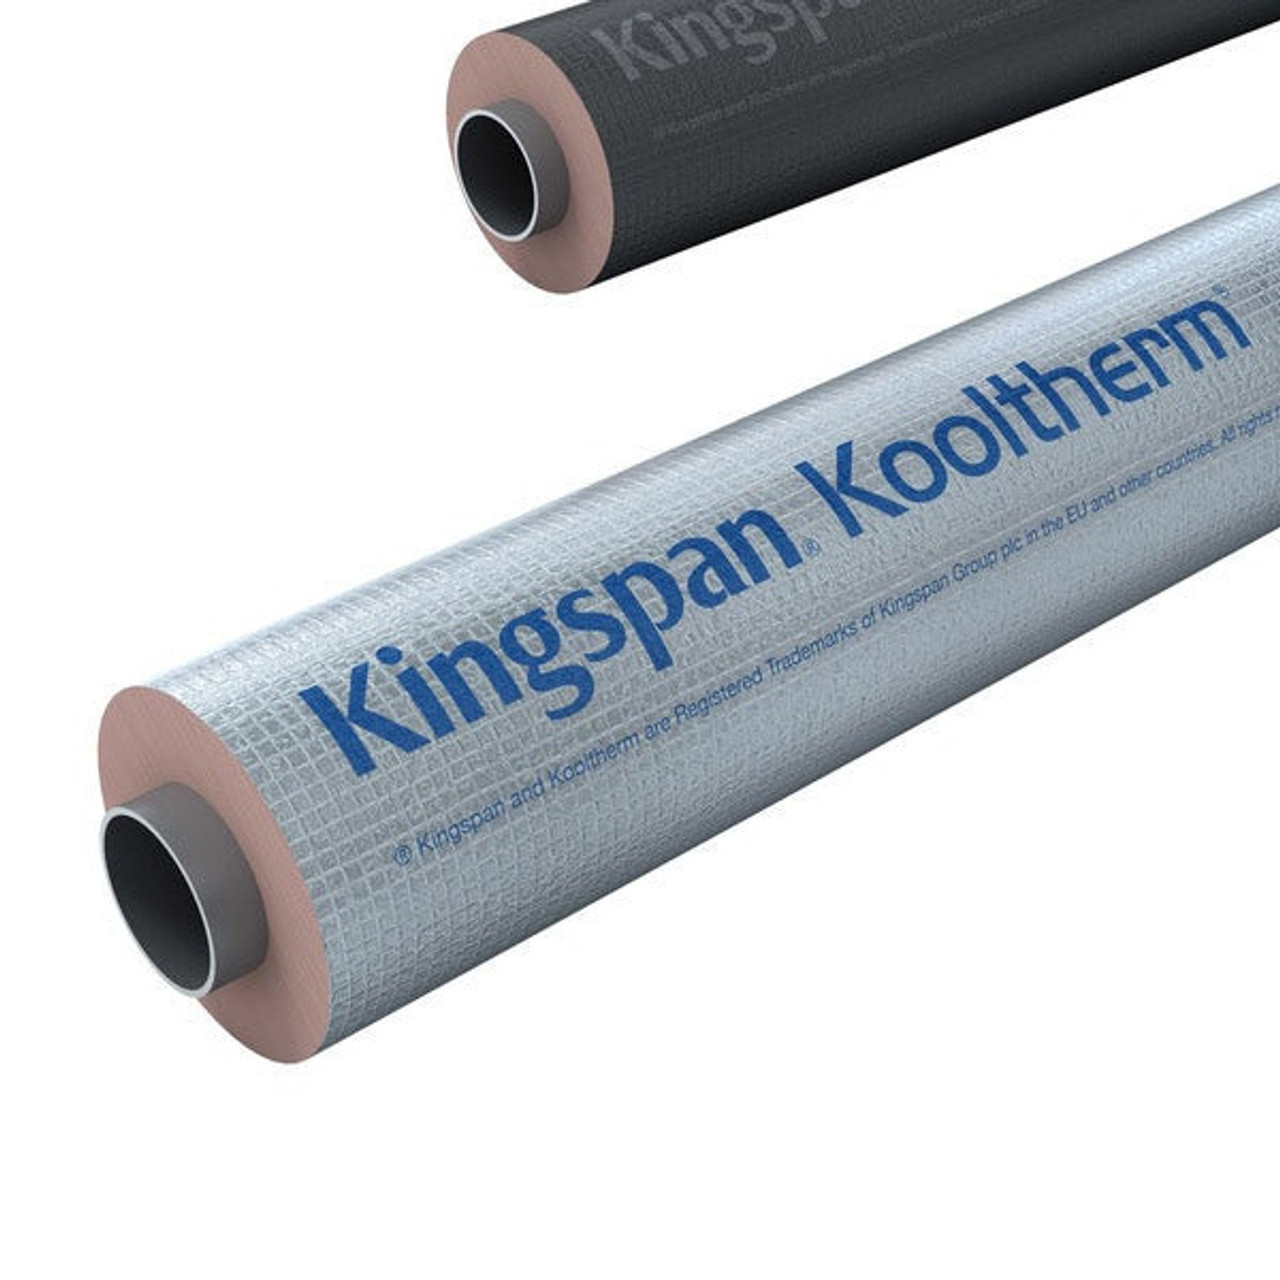 Kooltherm FM Pipe Insulation Lagging by Kingspan - 76mm x 25mm x 1m  251480766 KGS-50356